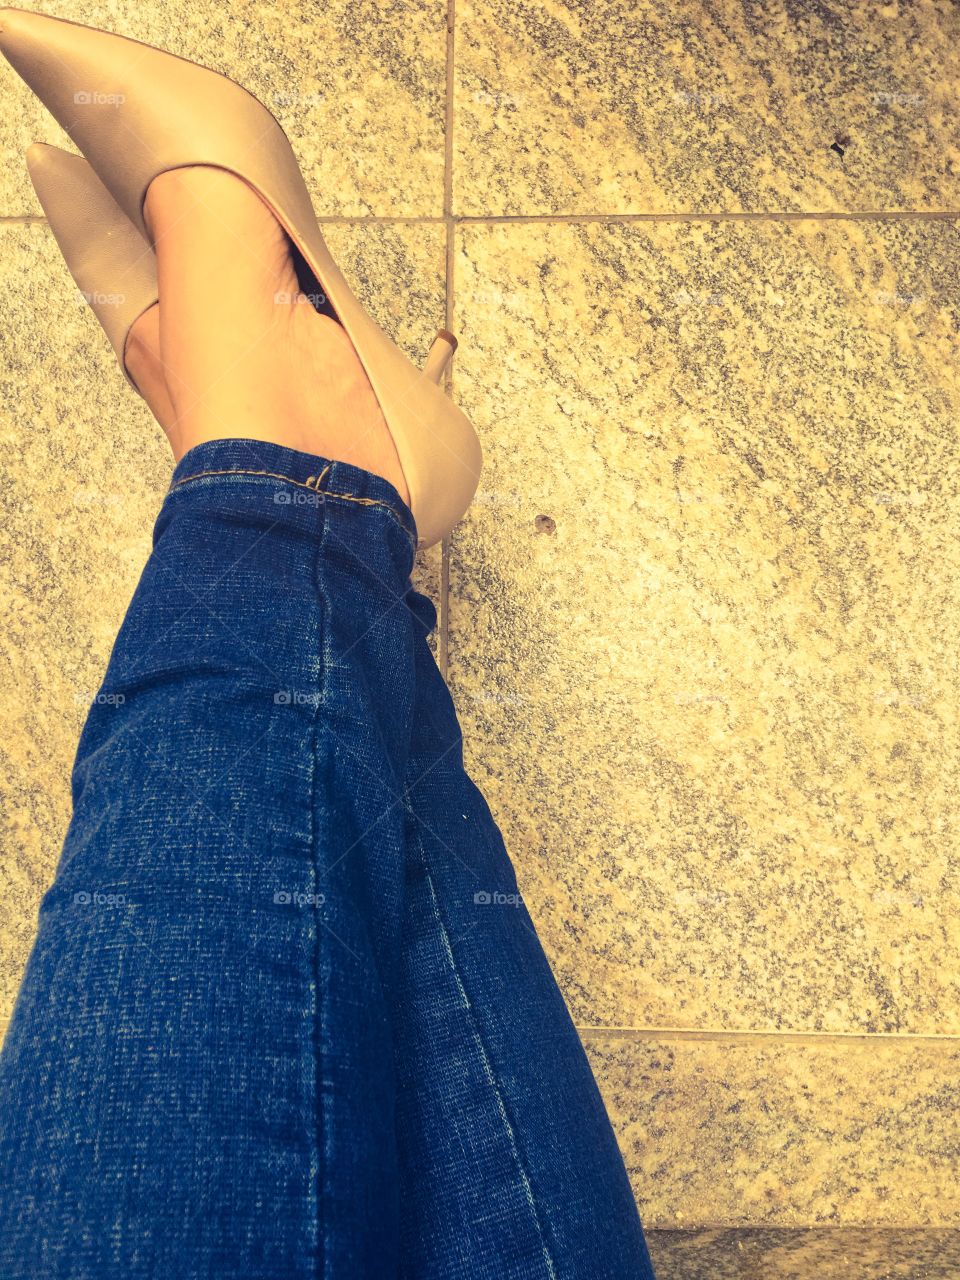 Jeans and high heels